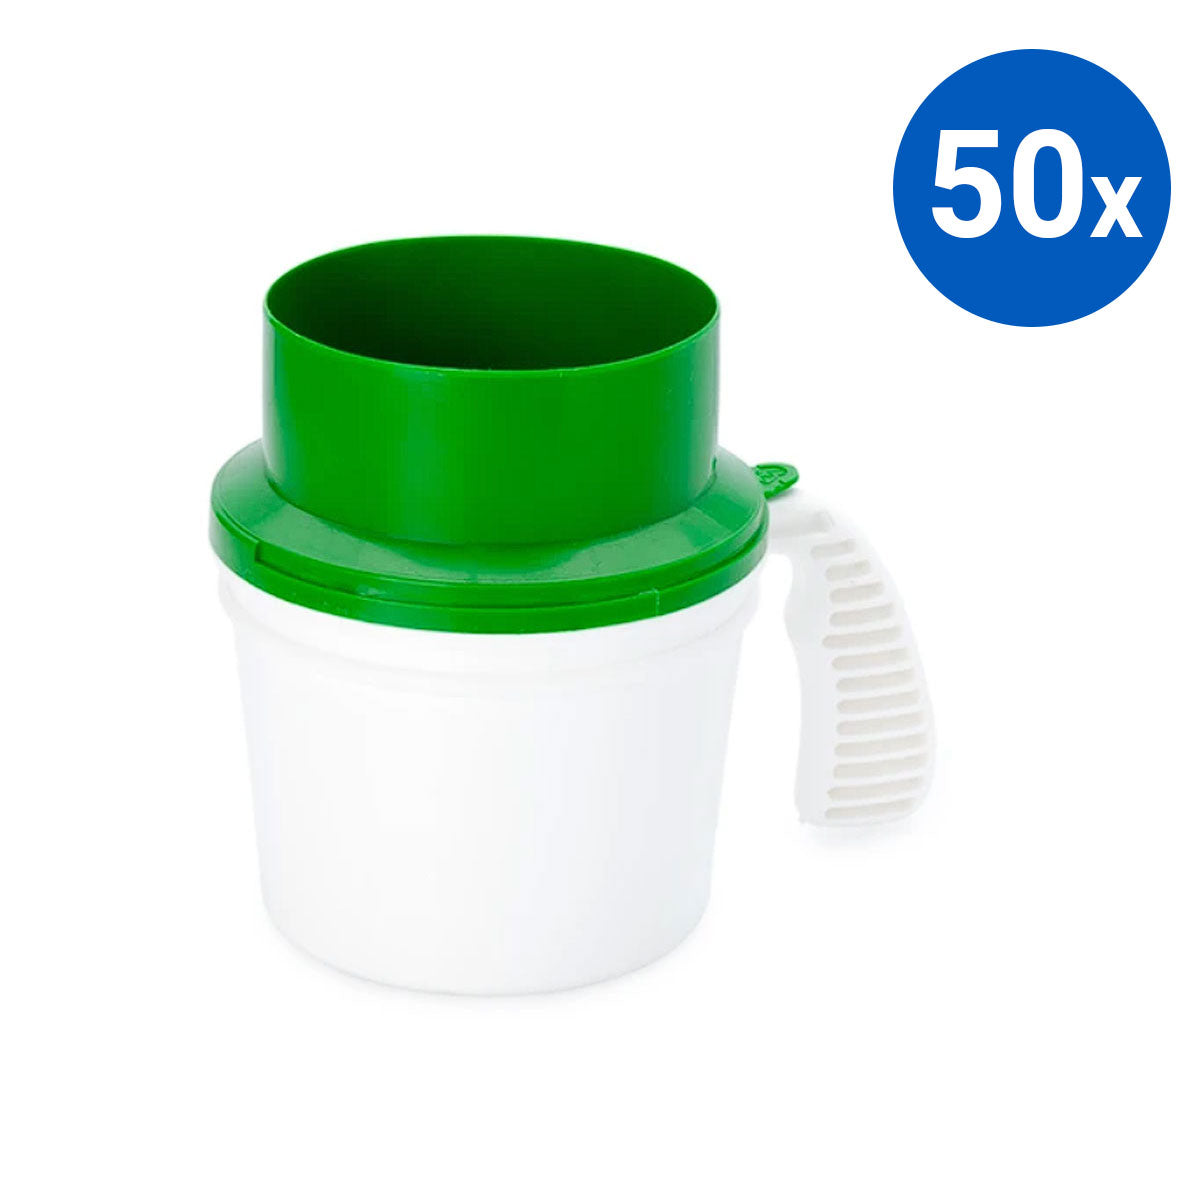 50x Collection Container Base and Quick Drop Lid - Green